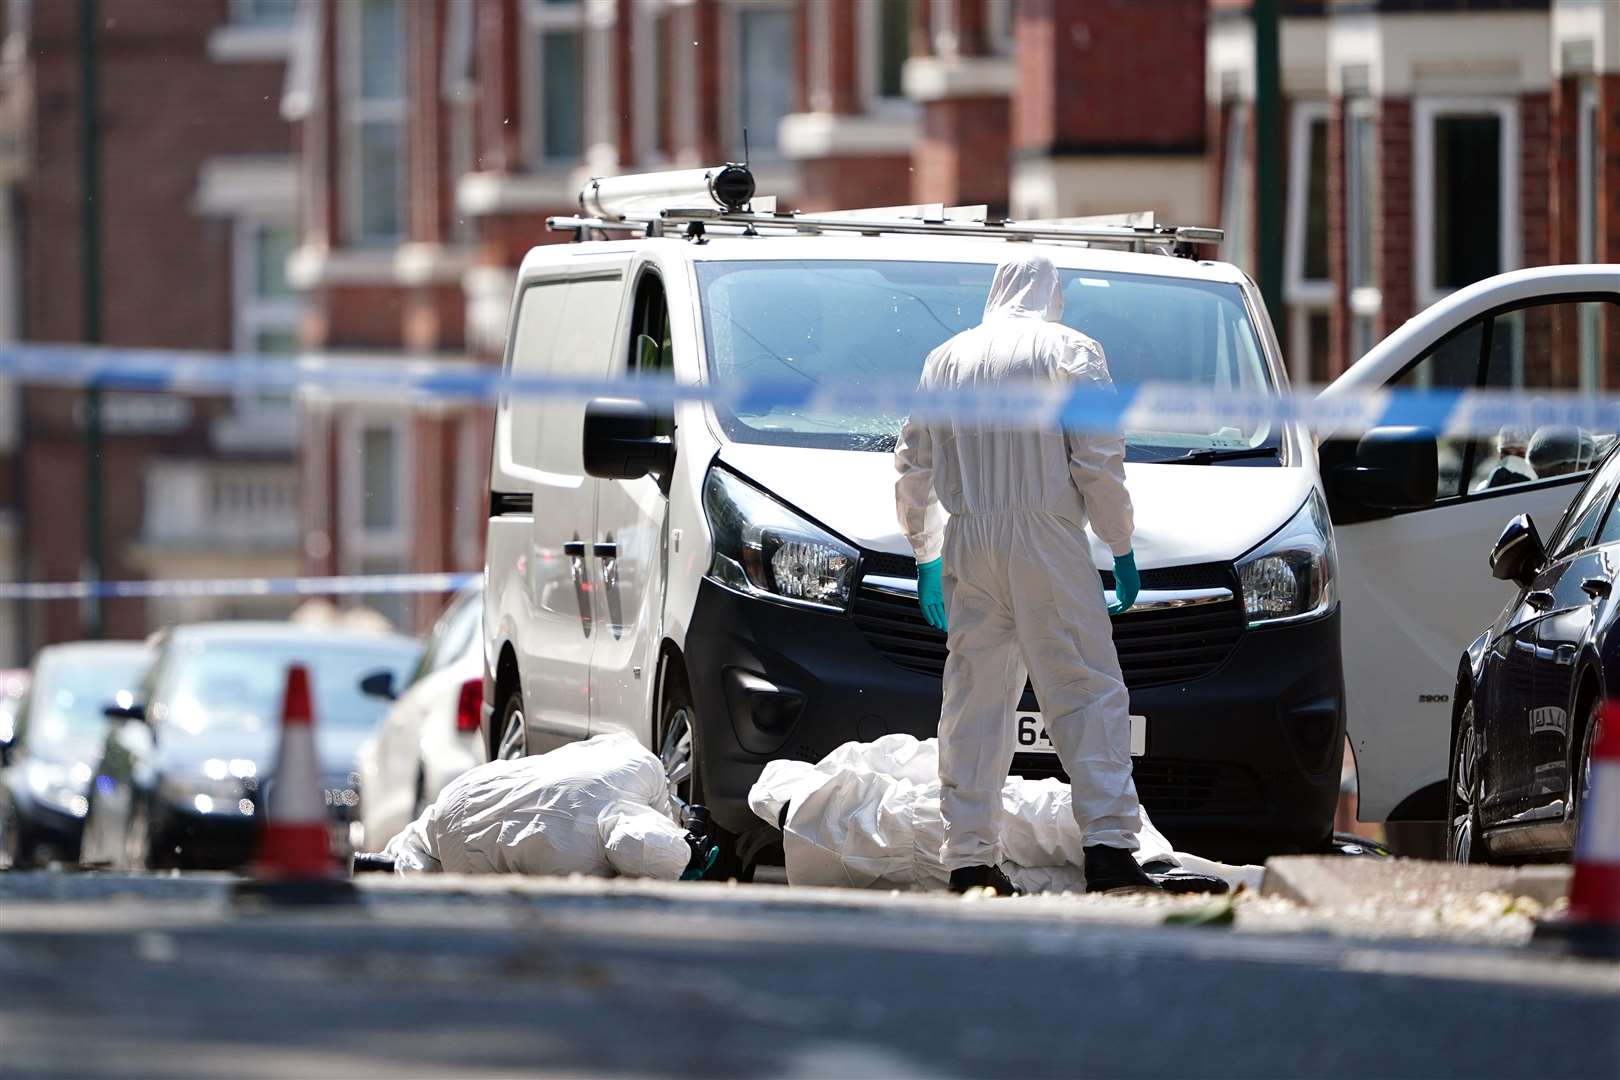 Police forensics officers search a white van on the corner of Maples Street and Bentinck Road in Nottingham (Zac Goodwin/PA)